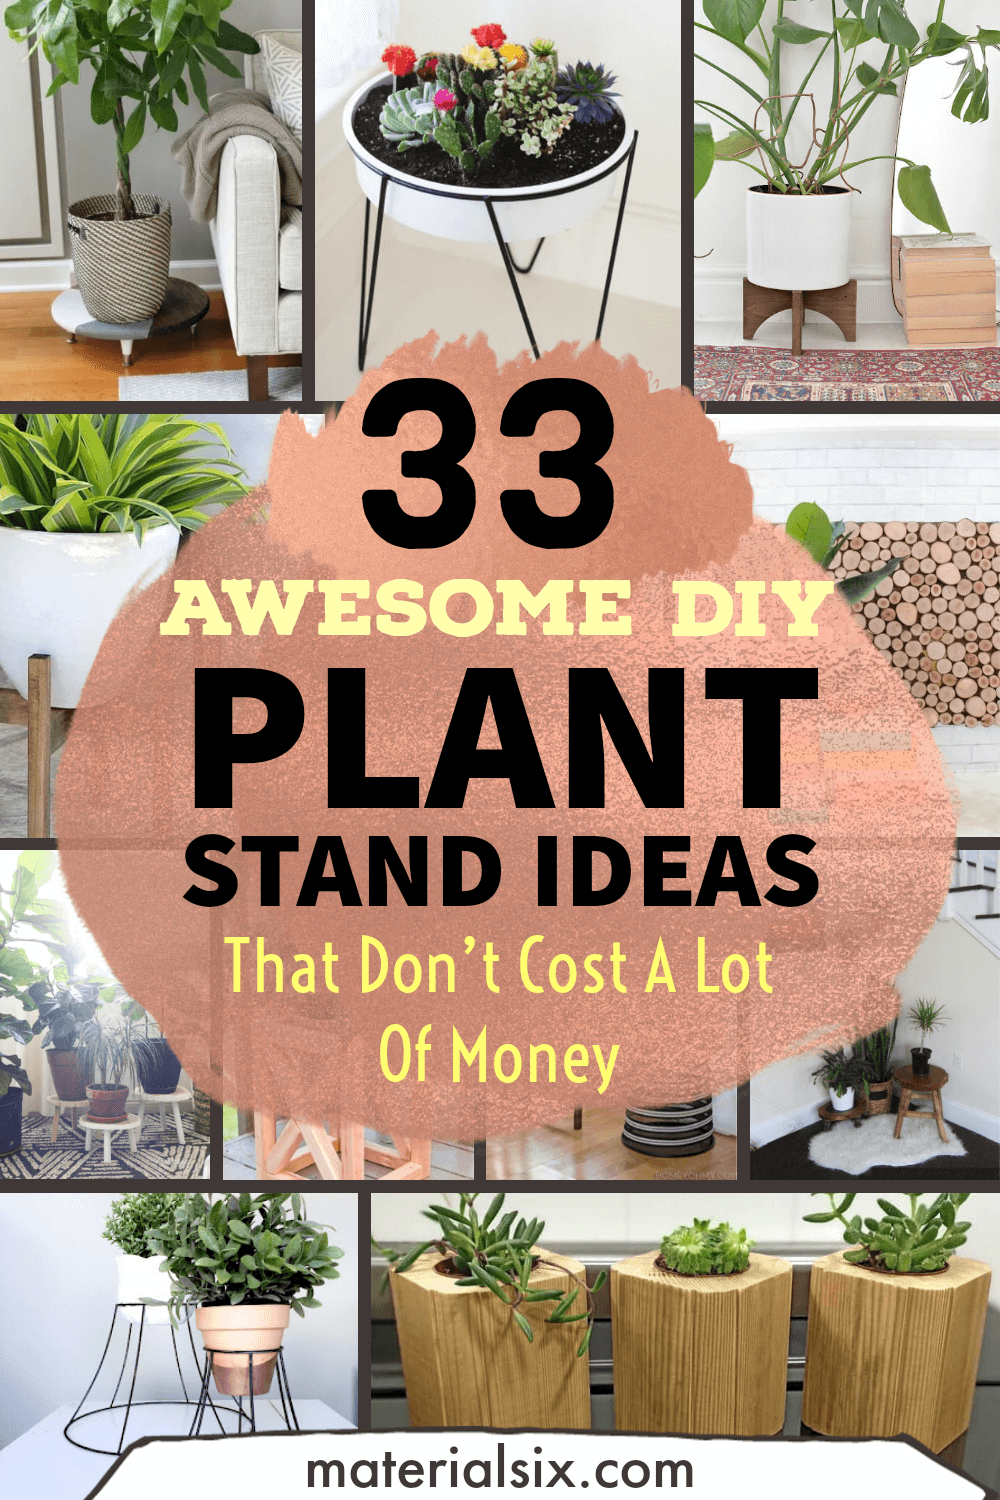 33 Awesome DIY Plant Stand Ideas That Don’t Cost A Lot Of Money